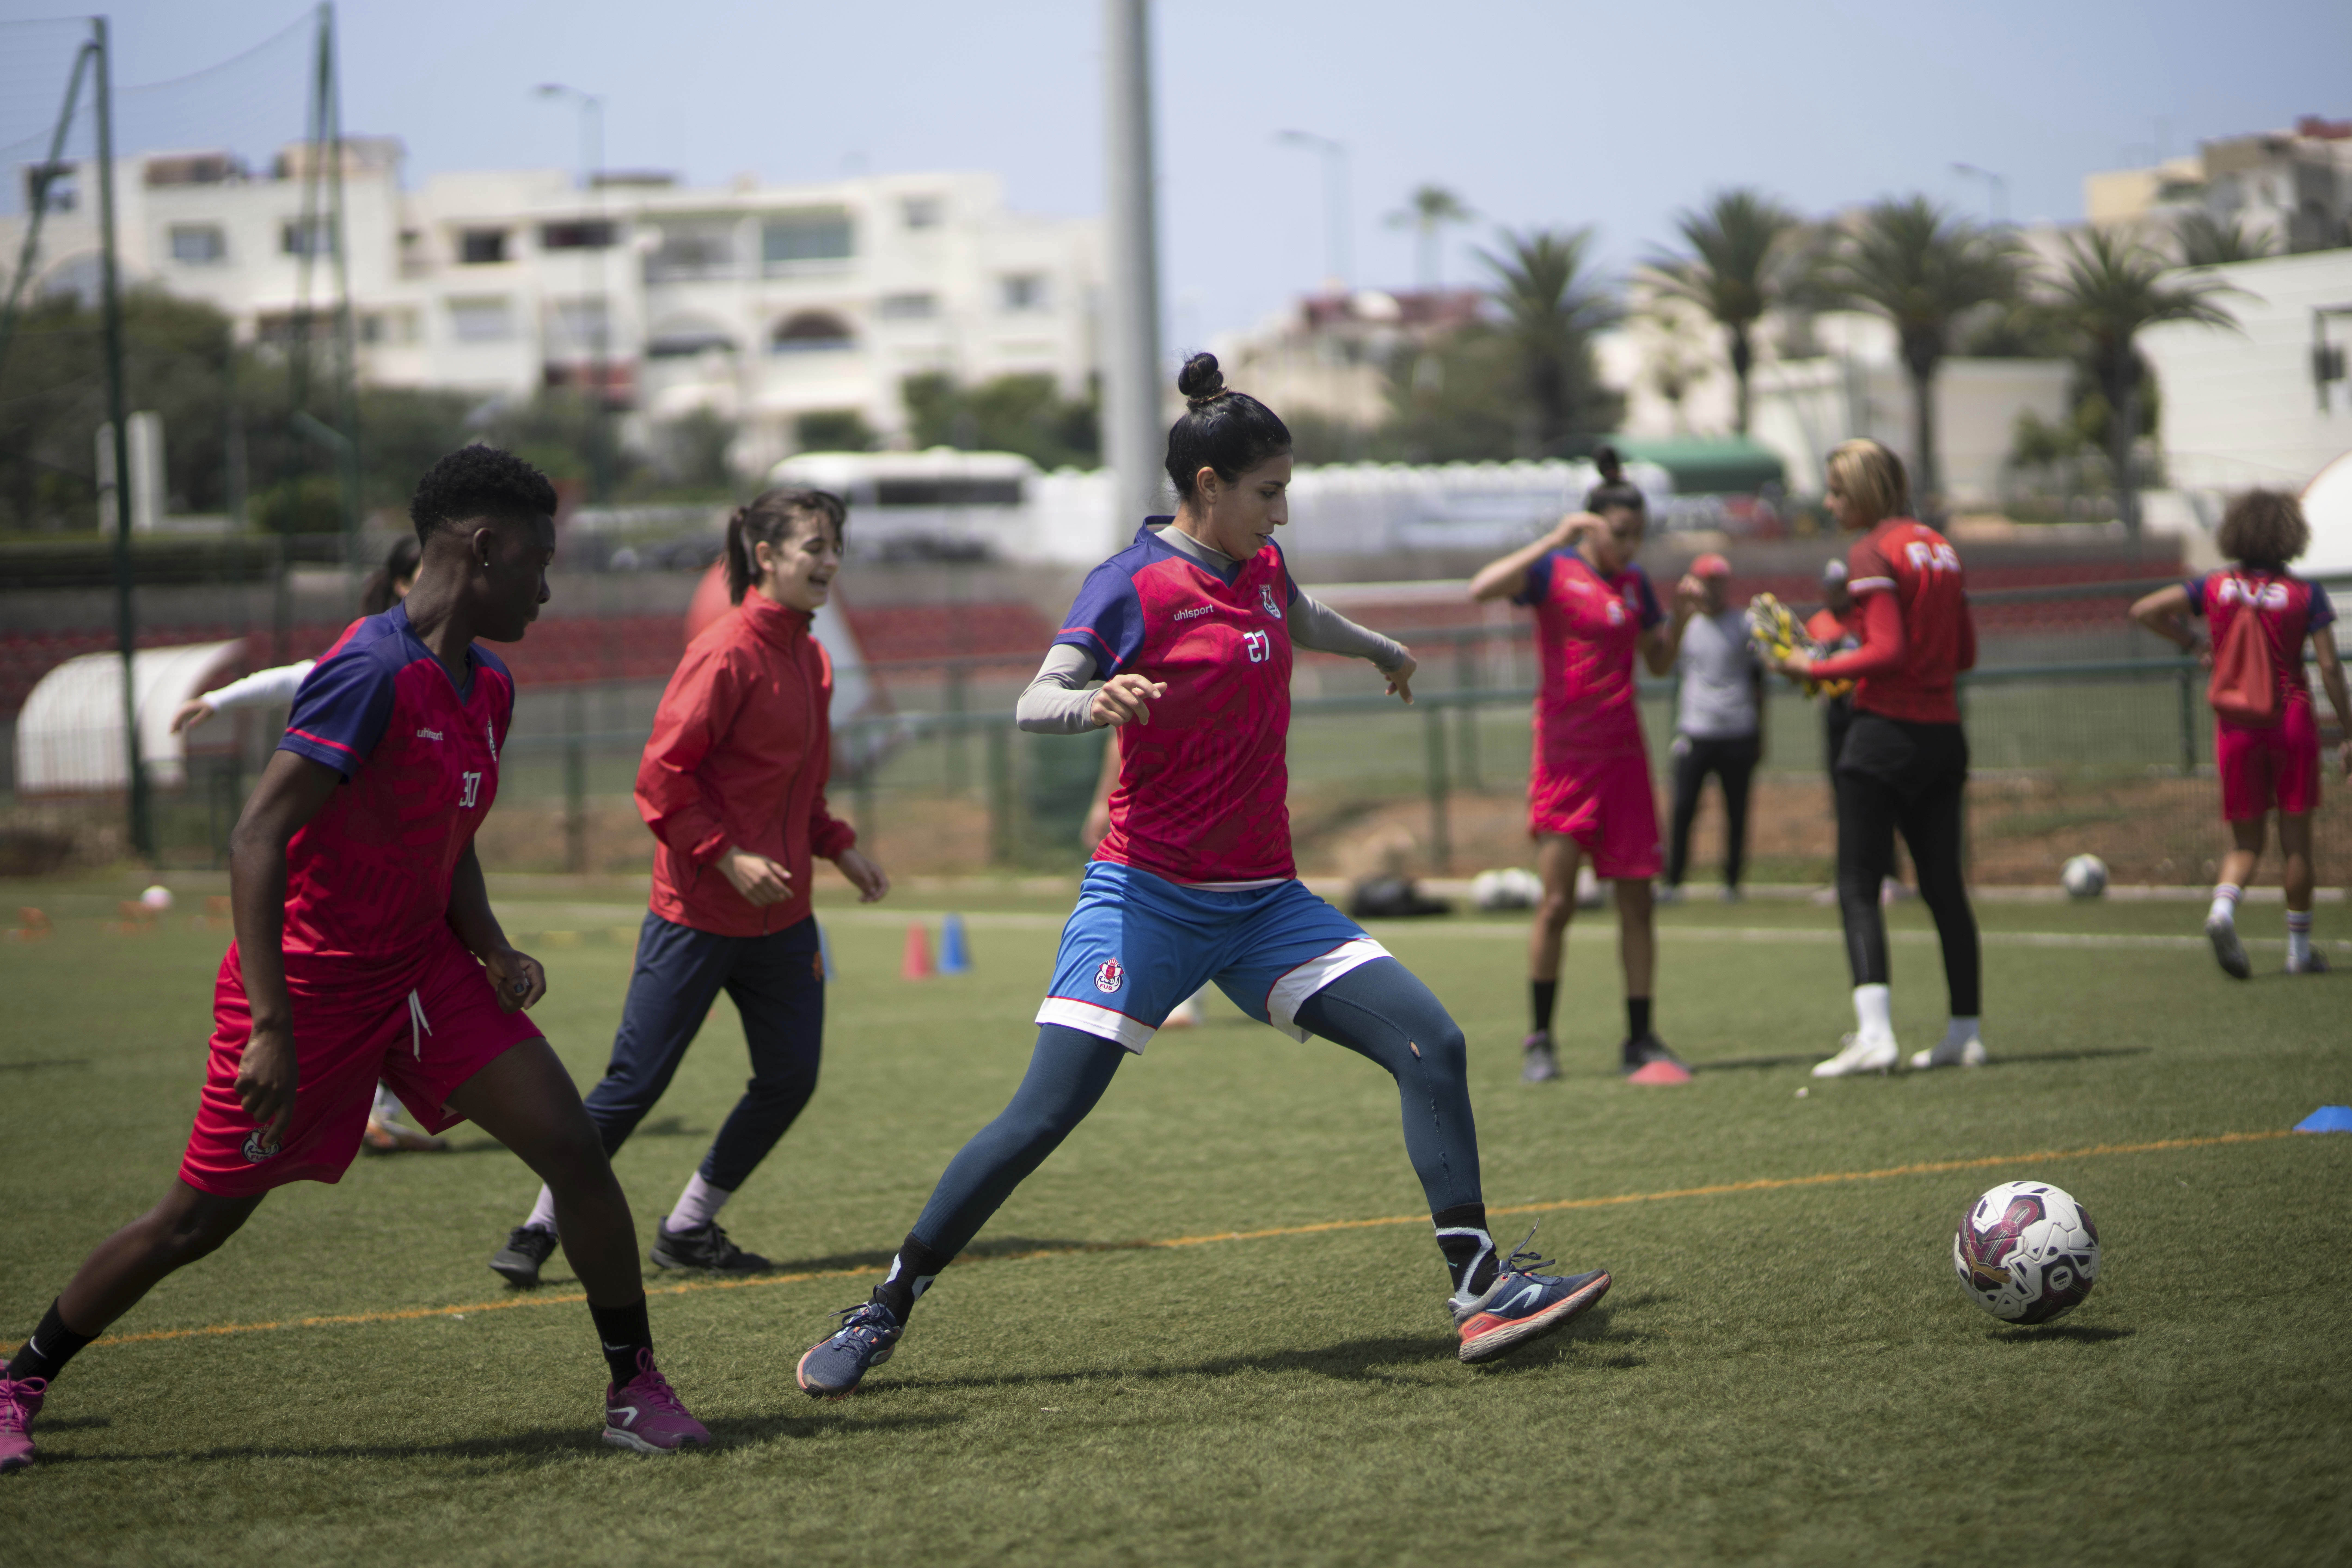 Moroccan joy as national team makes history at Women's World Cup, Women's  World Cup News